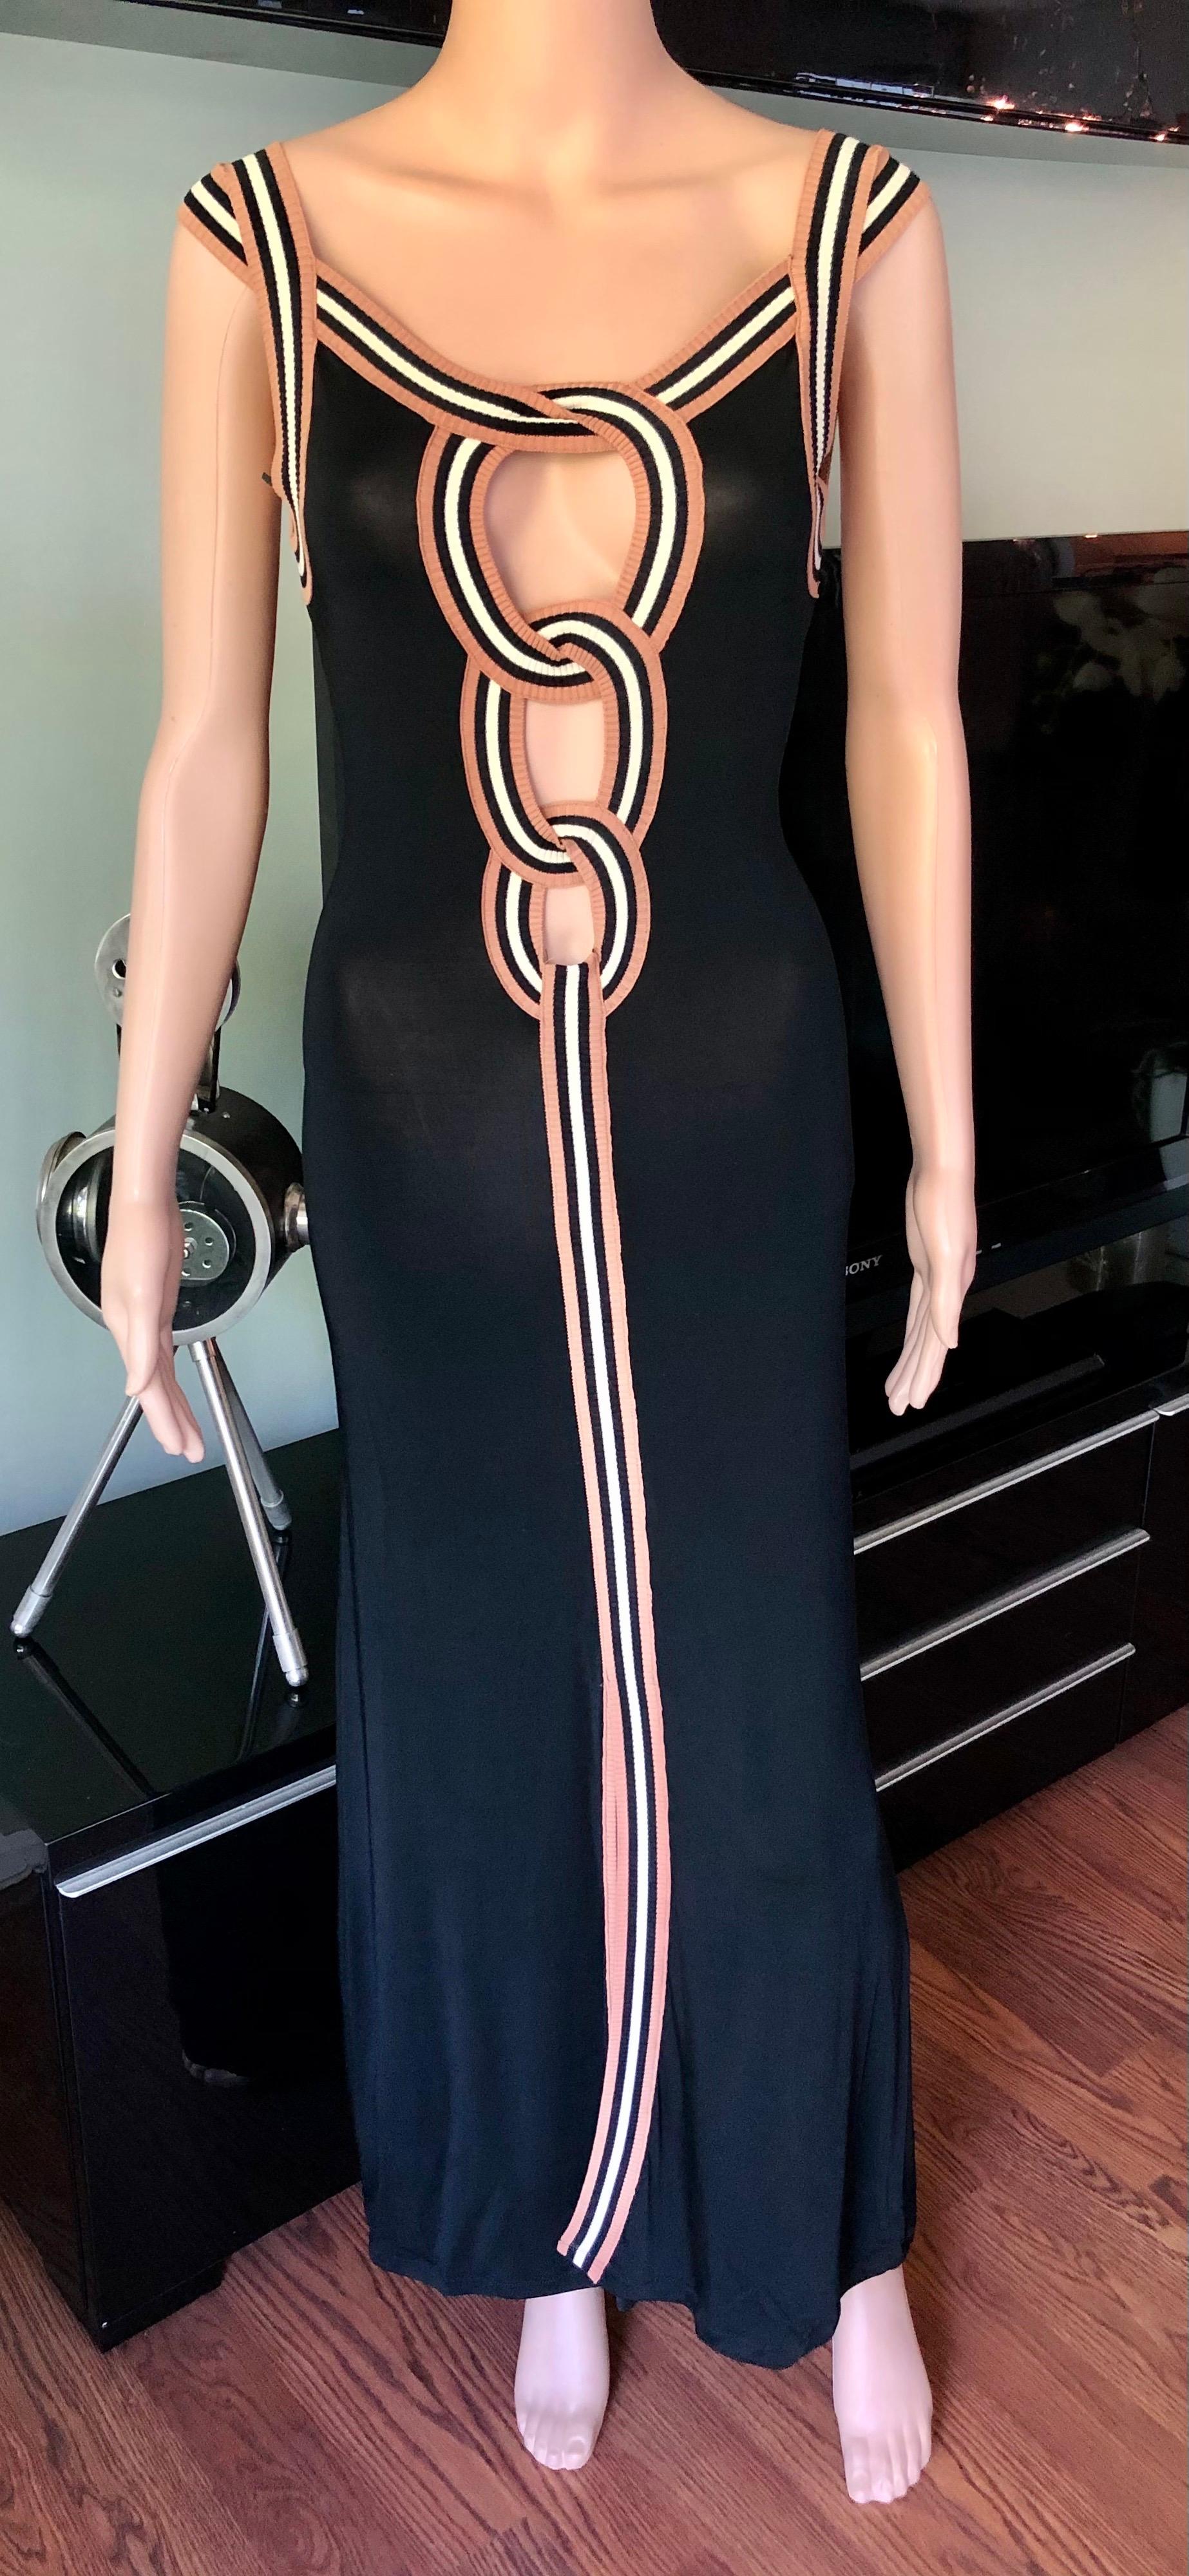 Jean Paul Gaultier Vintage Cutout Bodycon Maxi Dress Size M

Please note this dress is very versatile and could be worn with the cutouts in front or back based on preference.